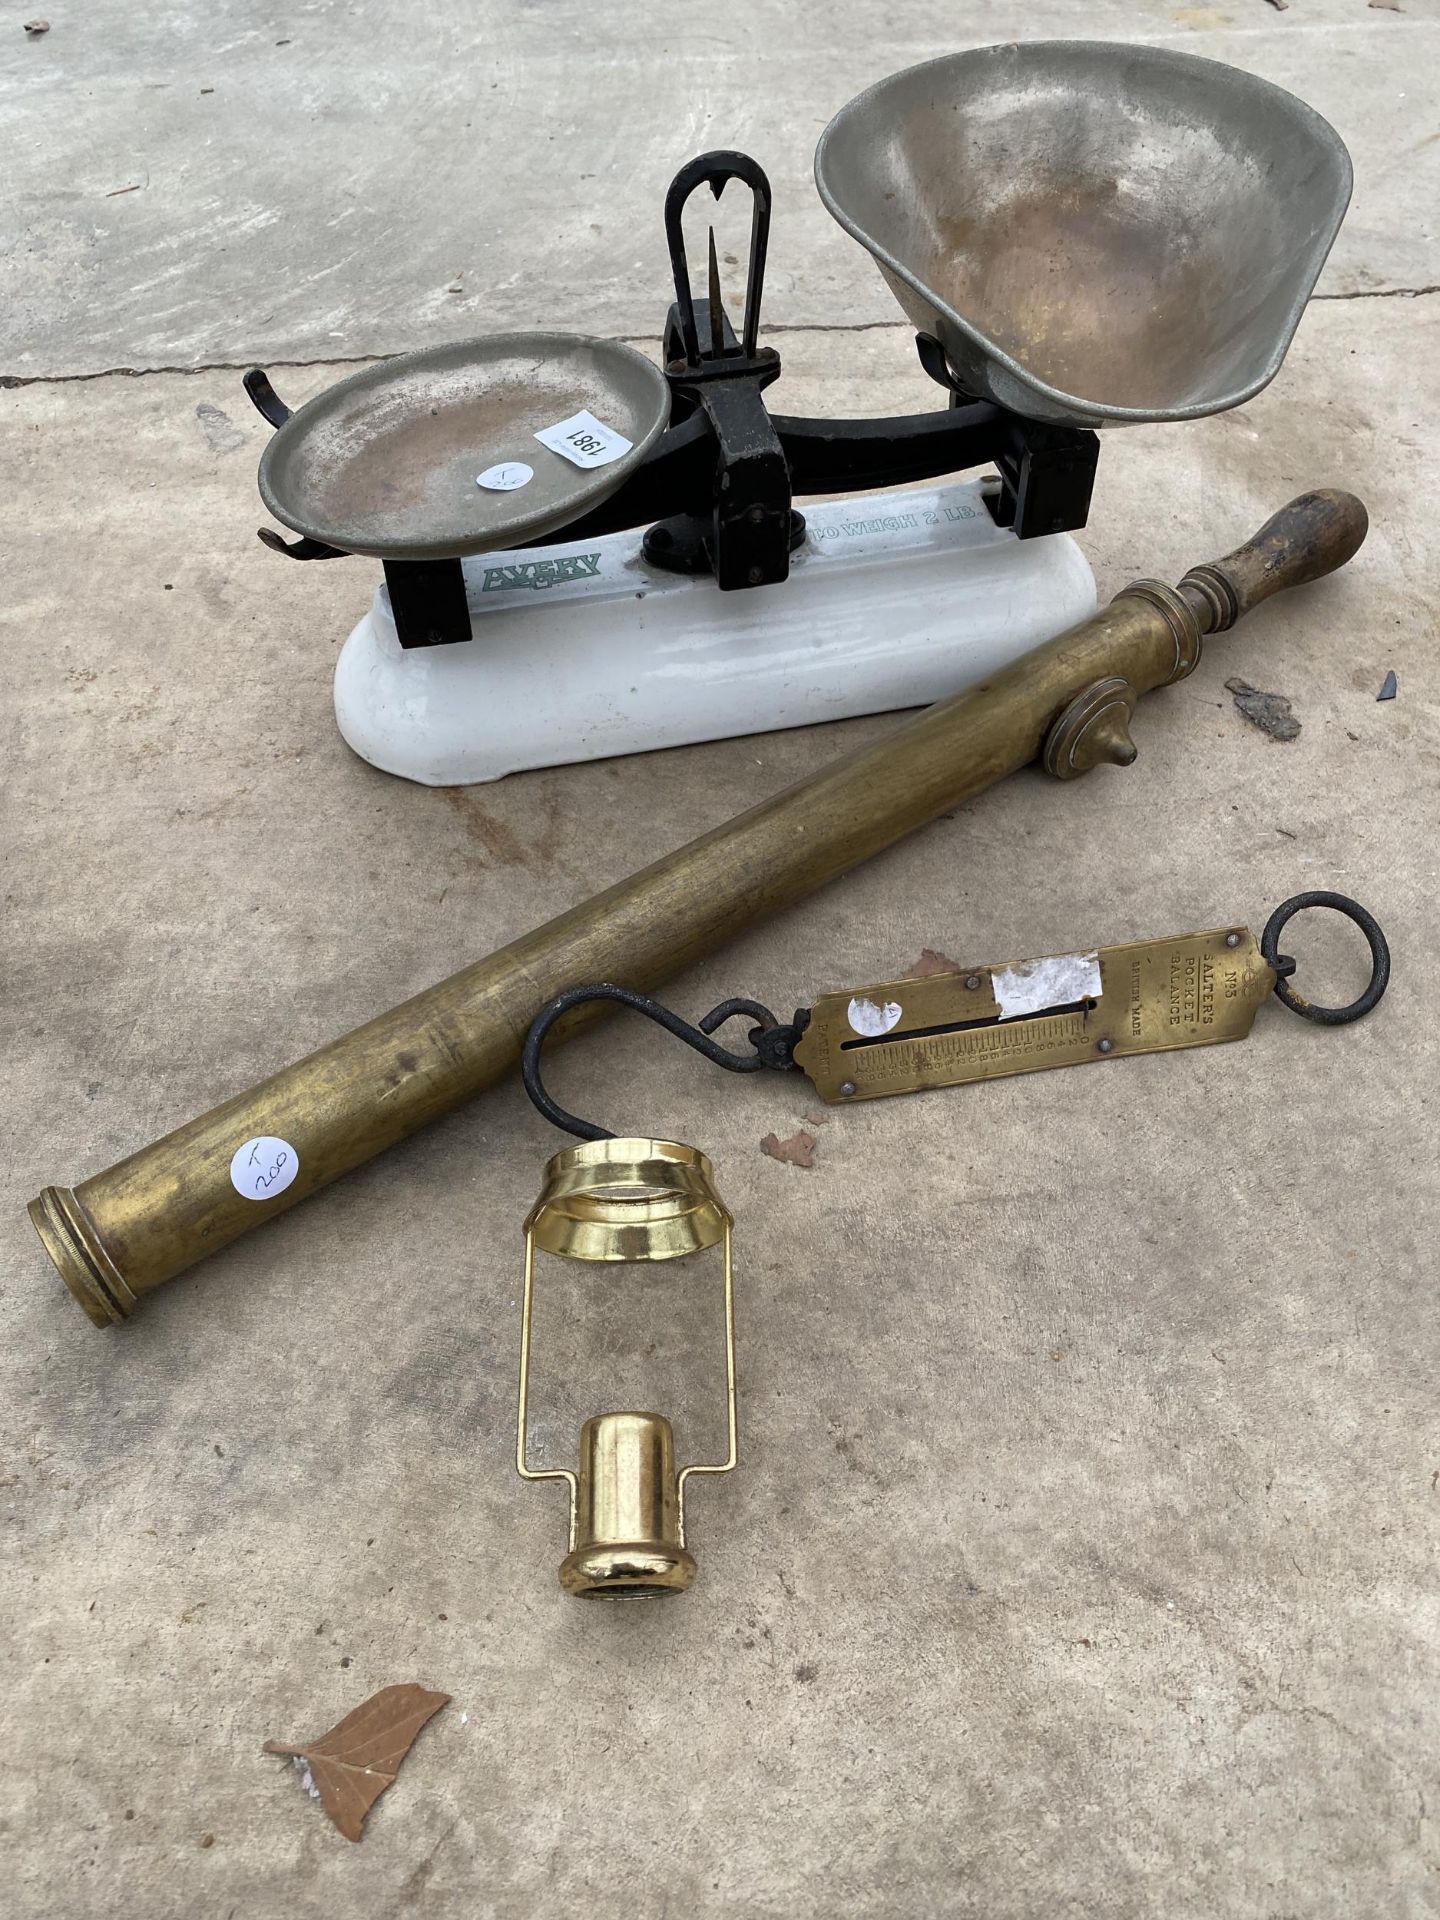 A SET OF BALANCE SCALES, A SMALL SET OF BRASS SCALES AND A VINTAGE BRASS GARDEN SPRAYER